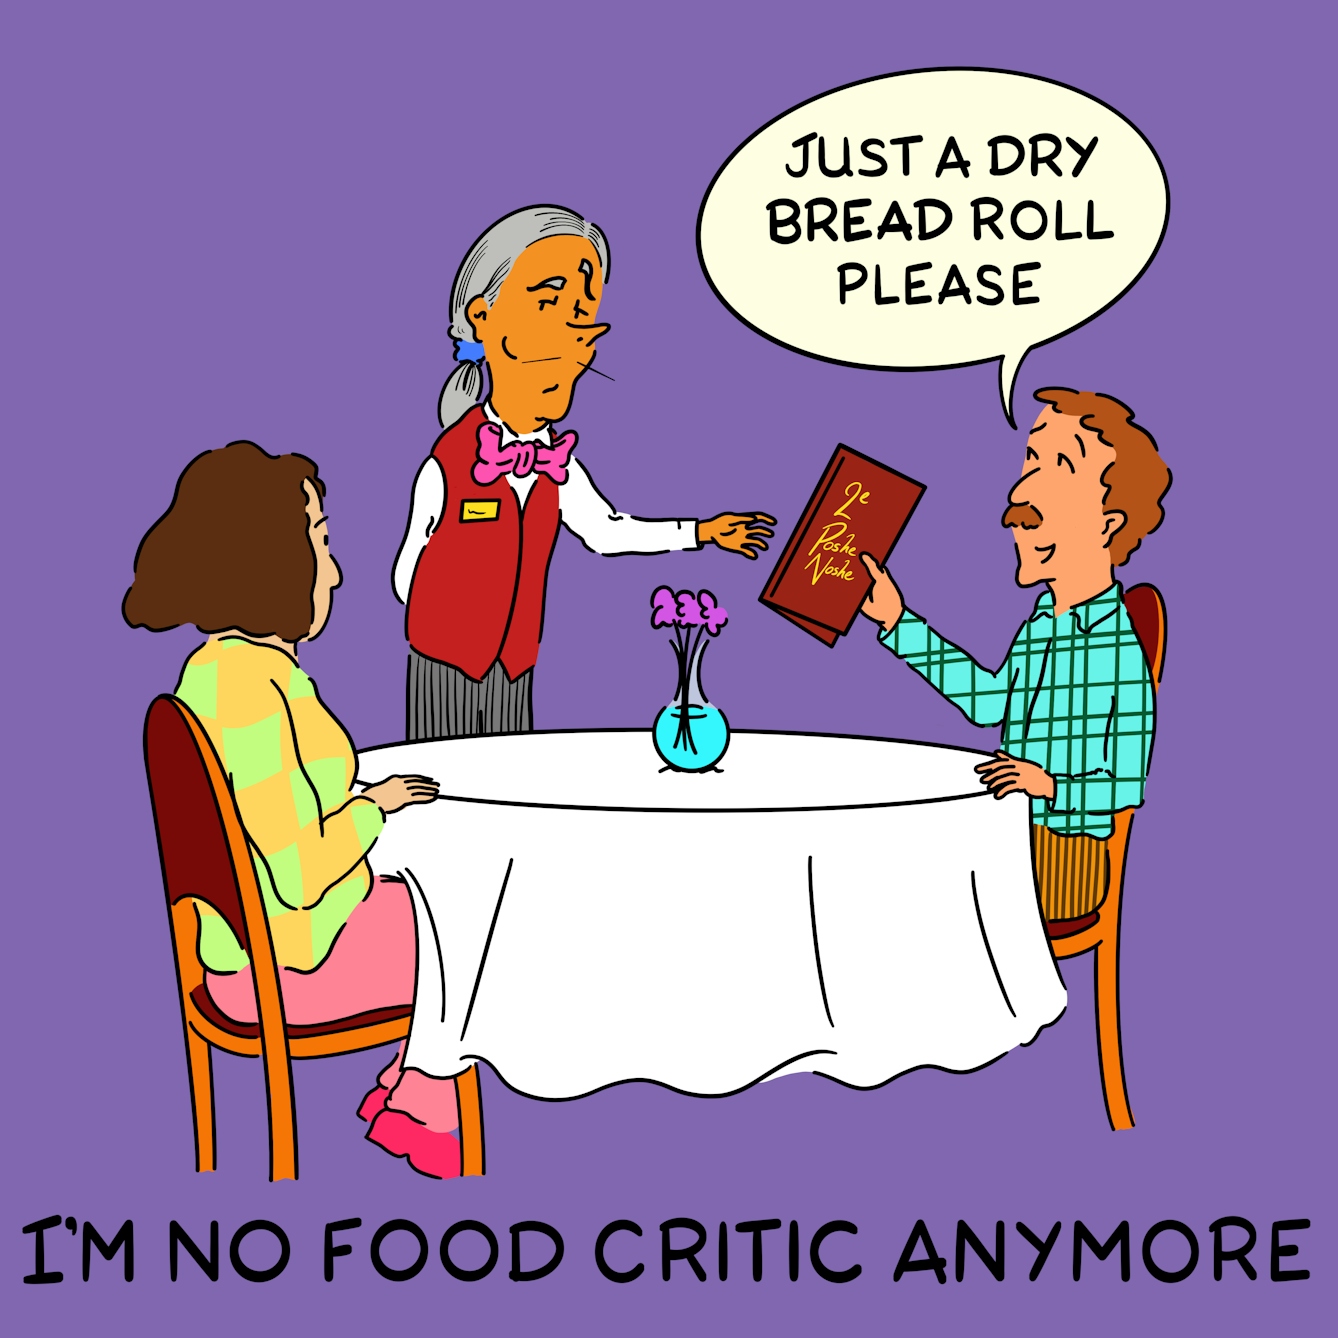 Panel 3 of a four-panel comic drawn digitally: a man with a plaid shirt and corduroy trousers sits at a restaurant table, handing the menu to the waiter and saying with a smile "Just a dry bread roll please"
The caption text reads "I'm no food critic anymore"